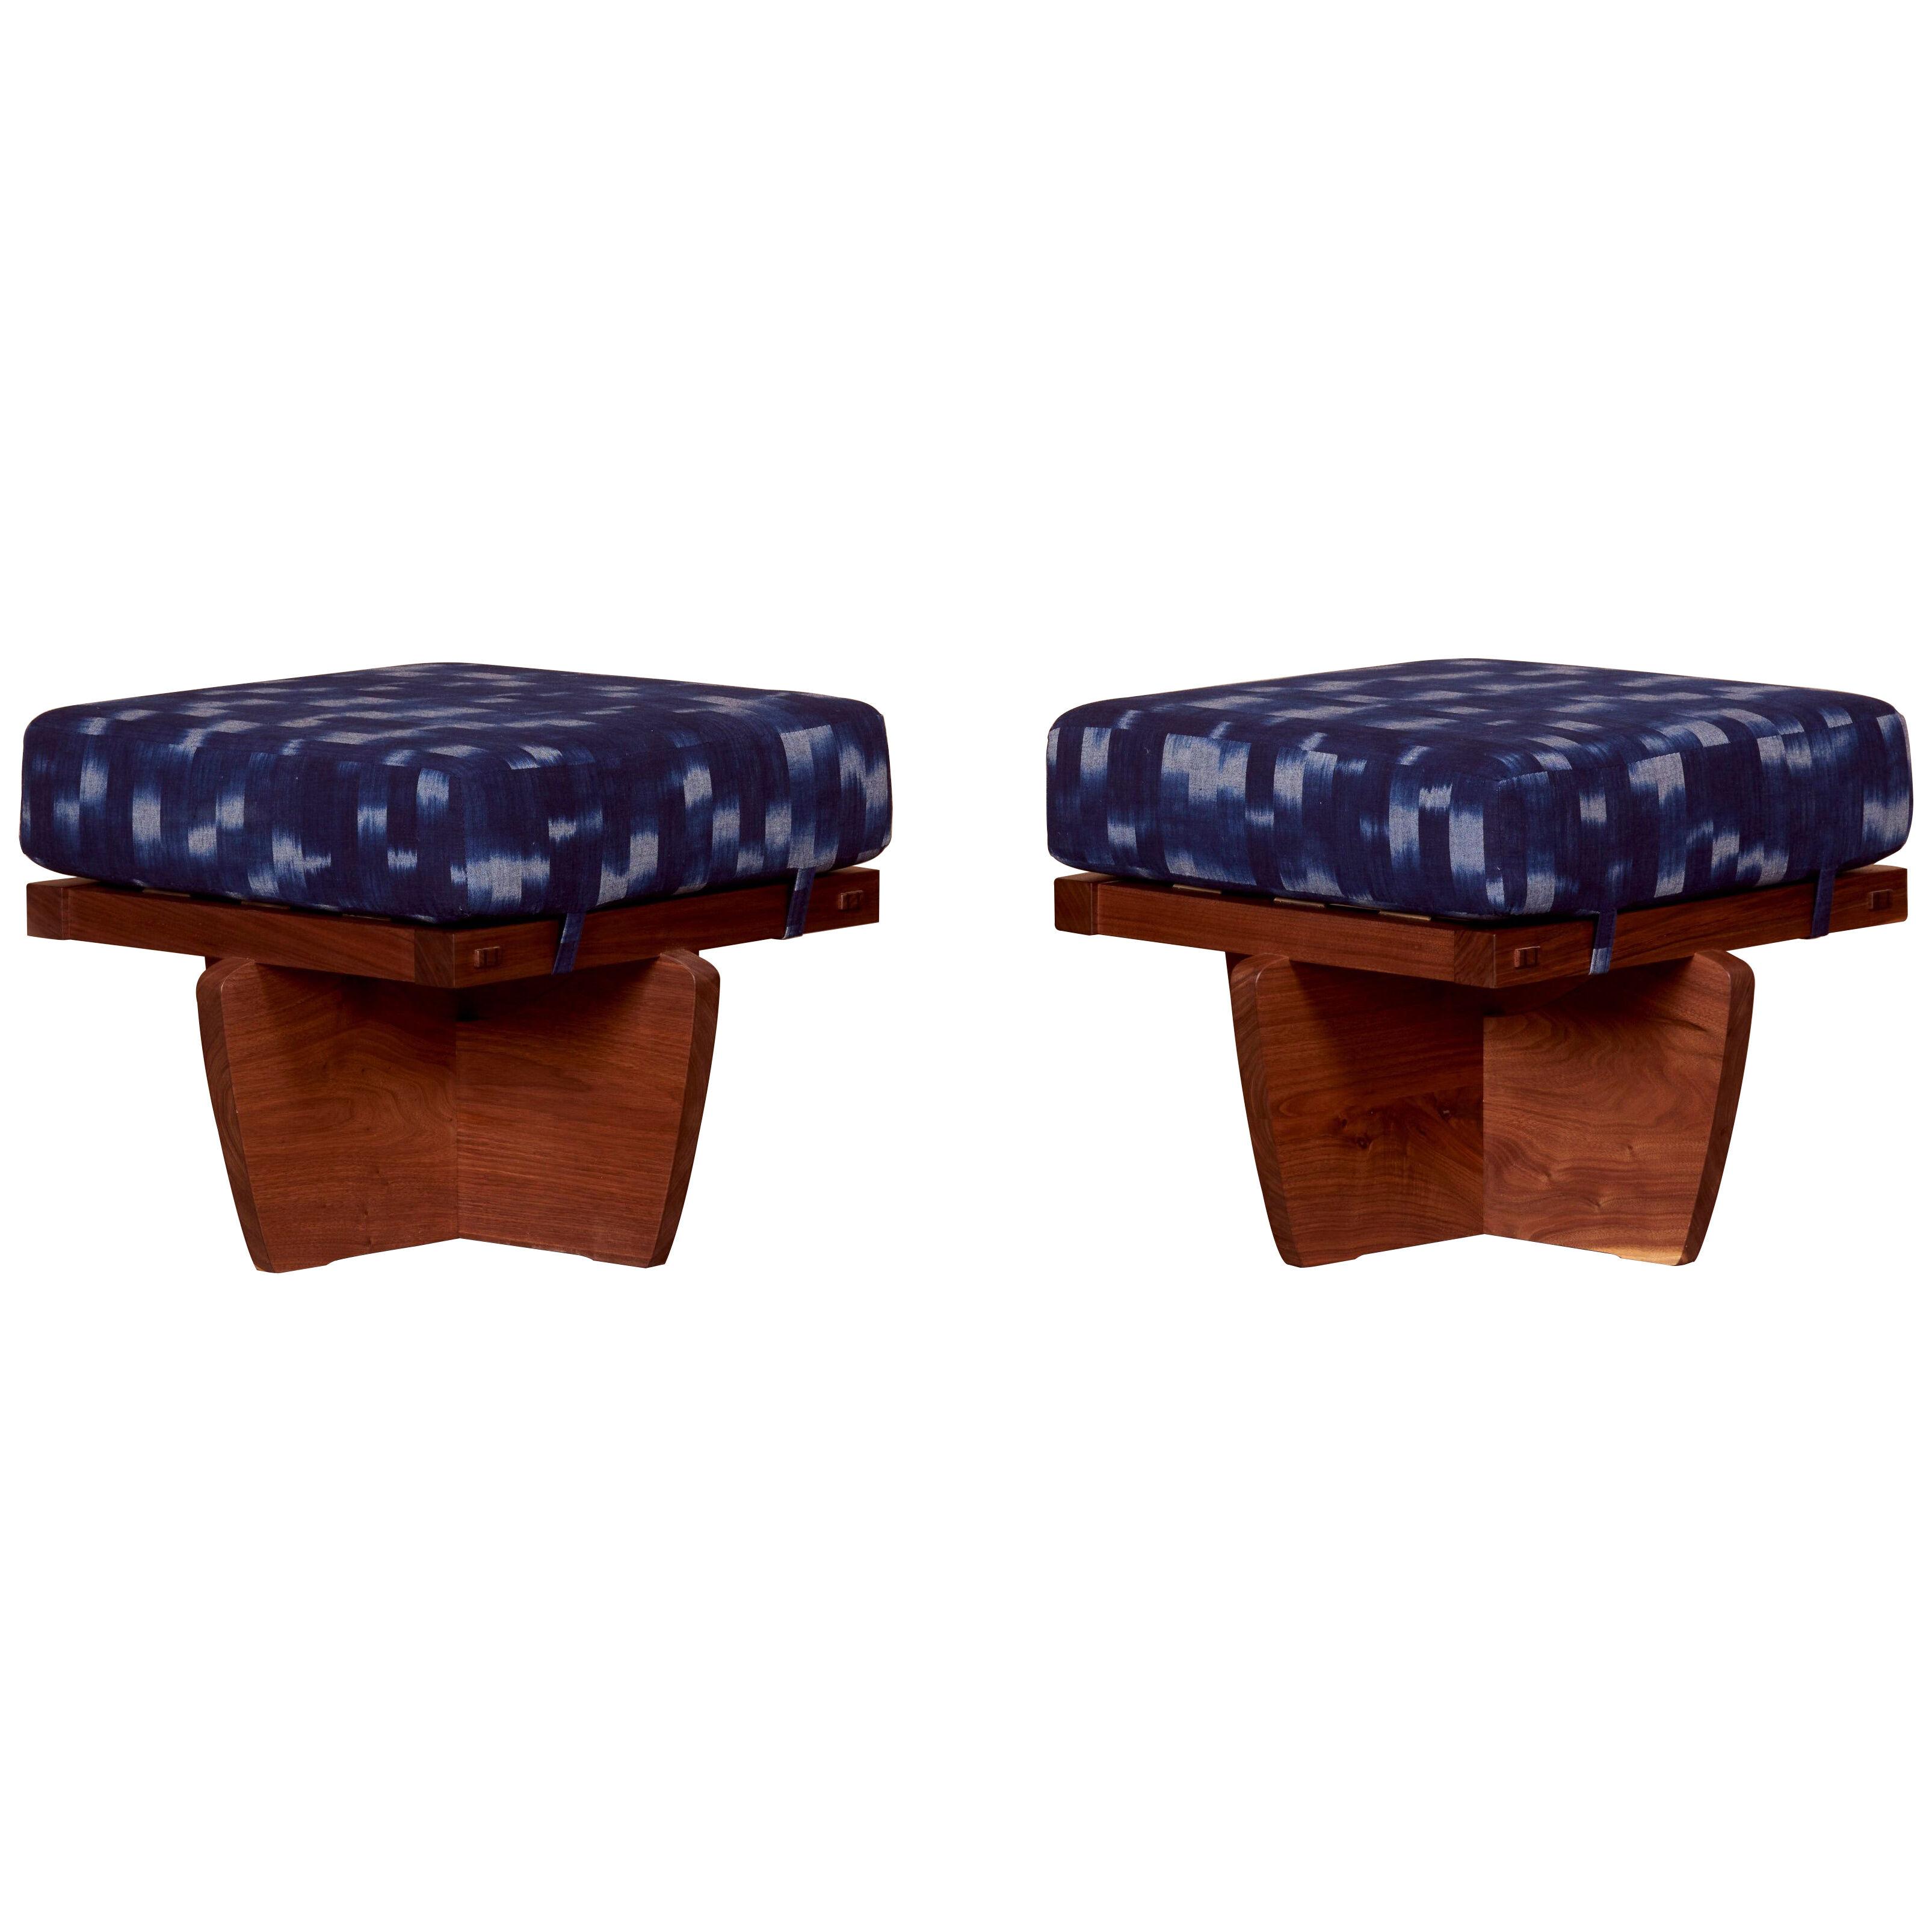 Pair of Greenrock Ottomans by George Nakashima, US 2021